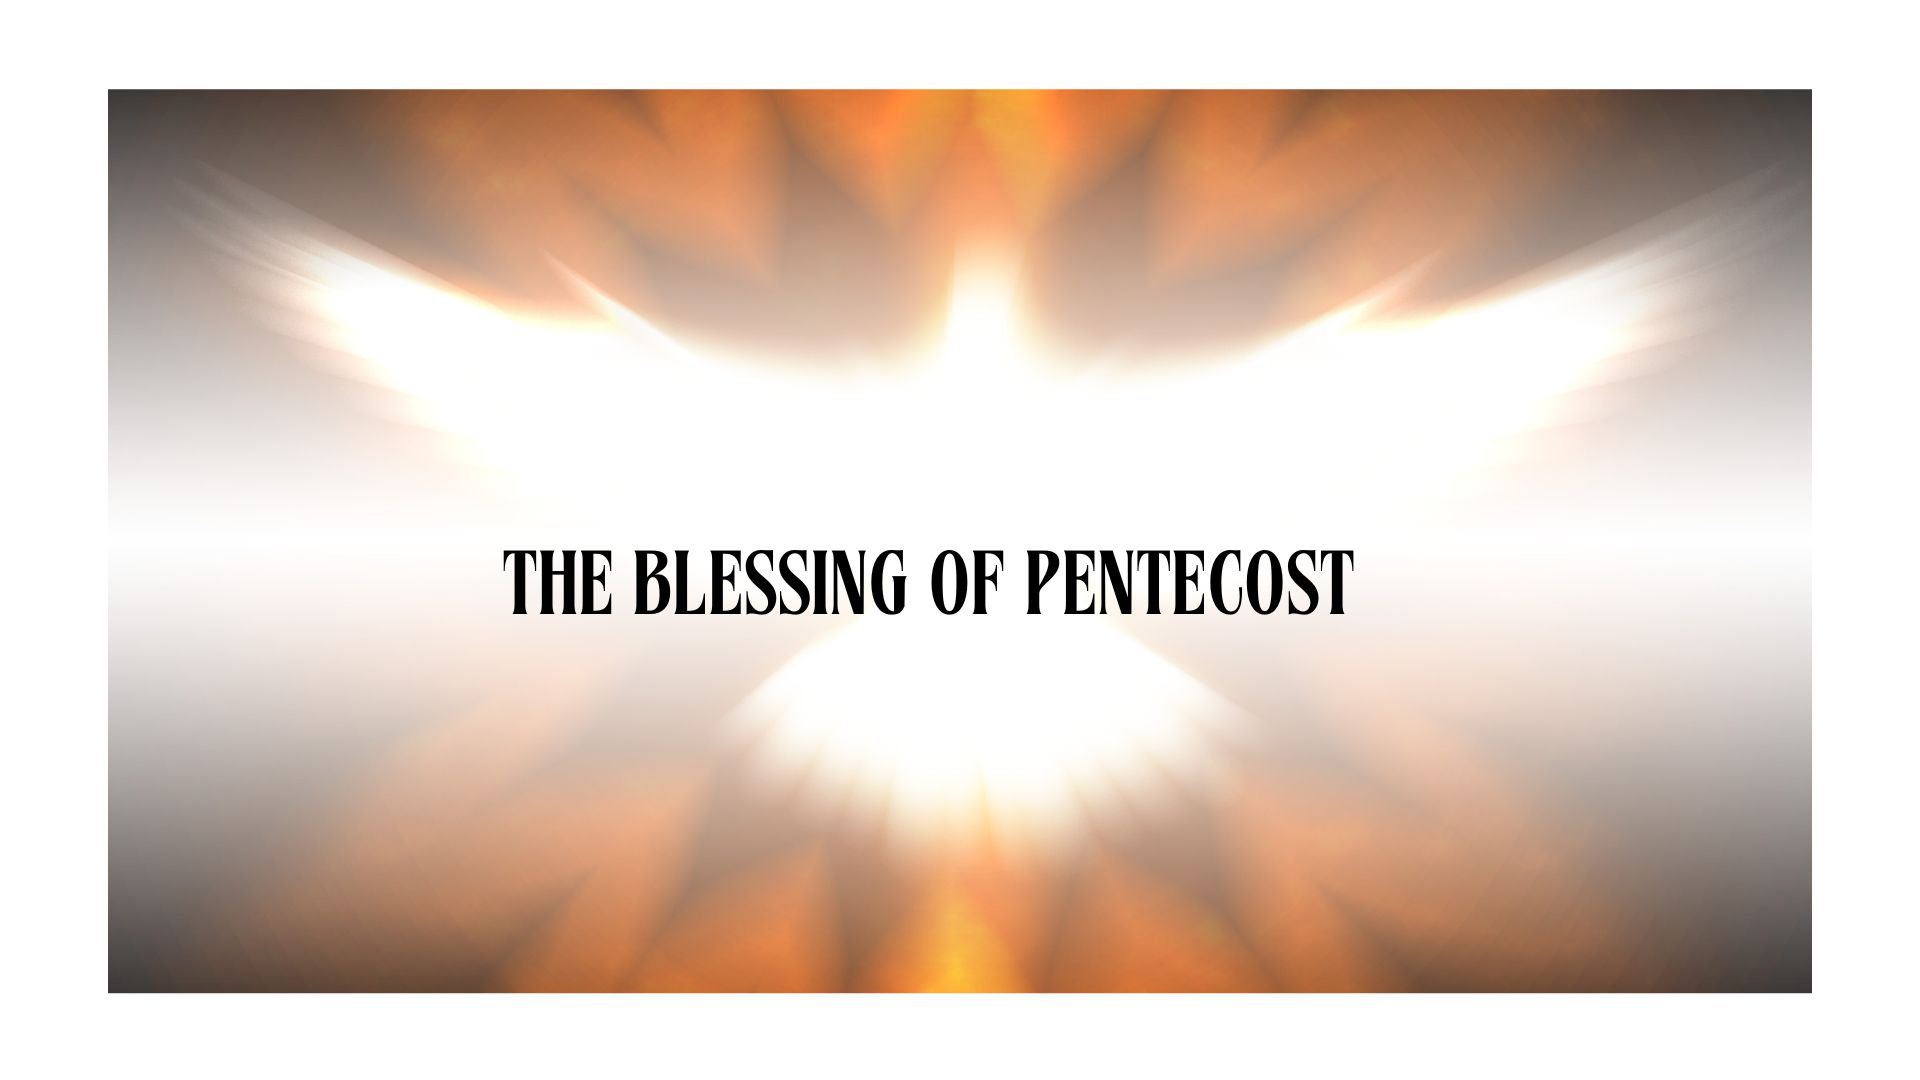 The Blessing of Pentecost